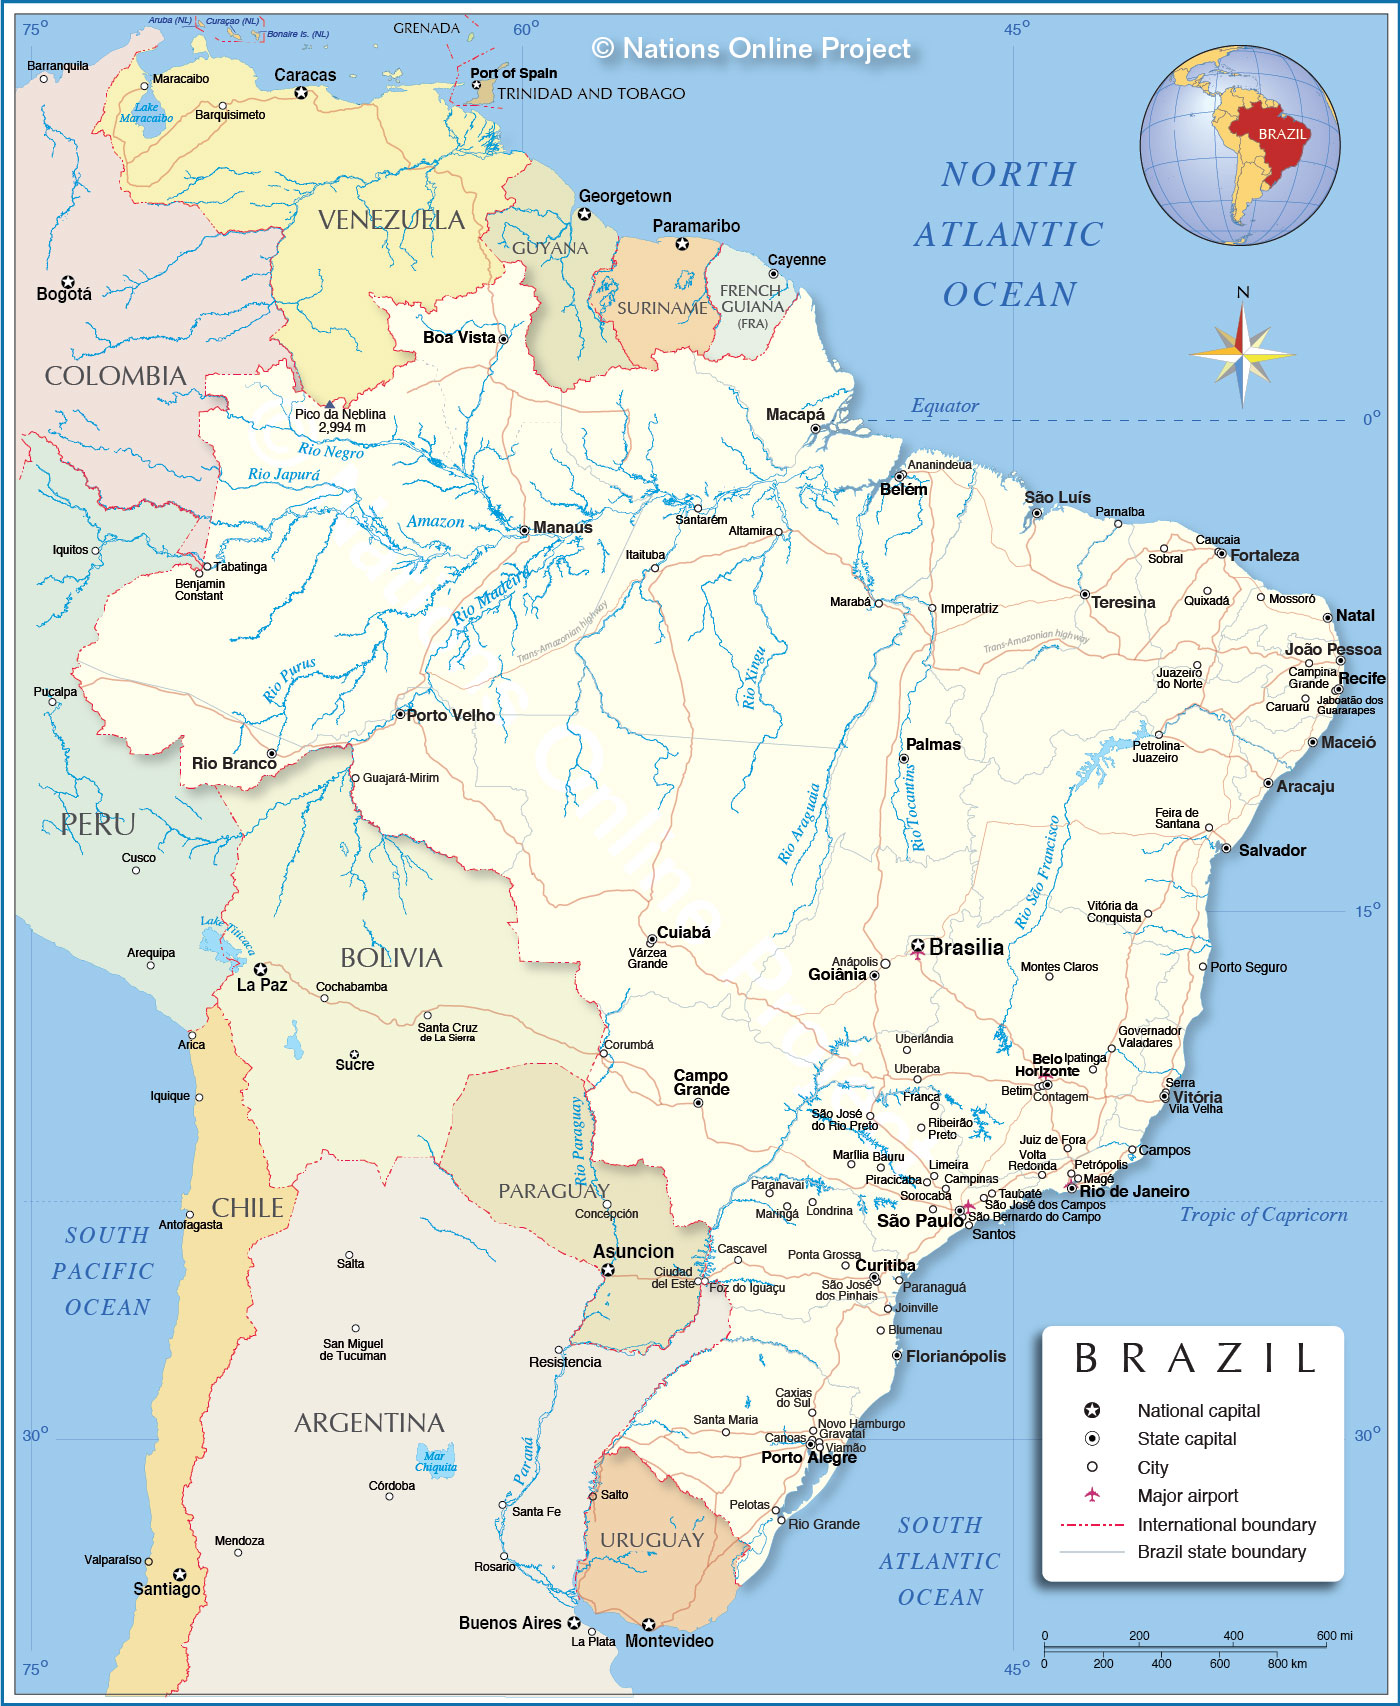 Detailed Map of Brazil - Nations Online Project